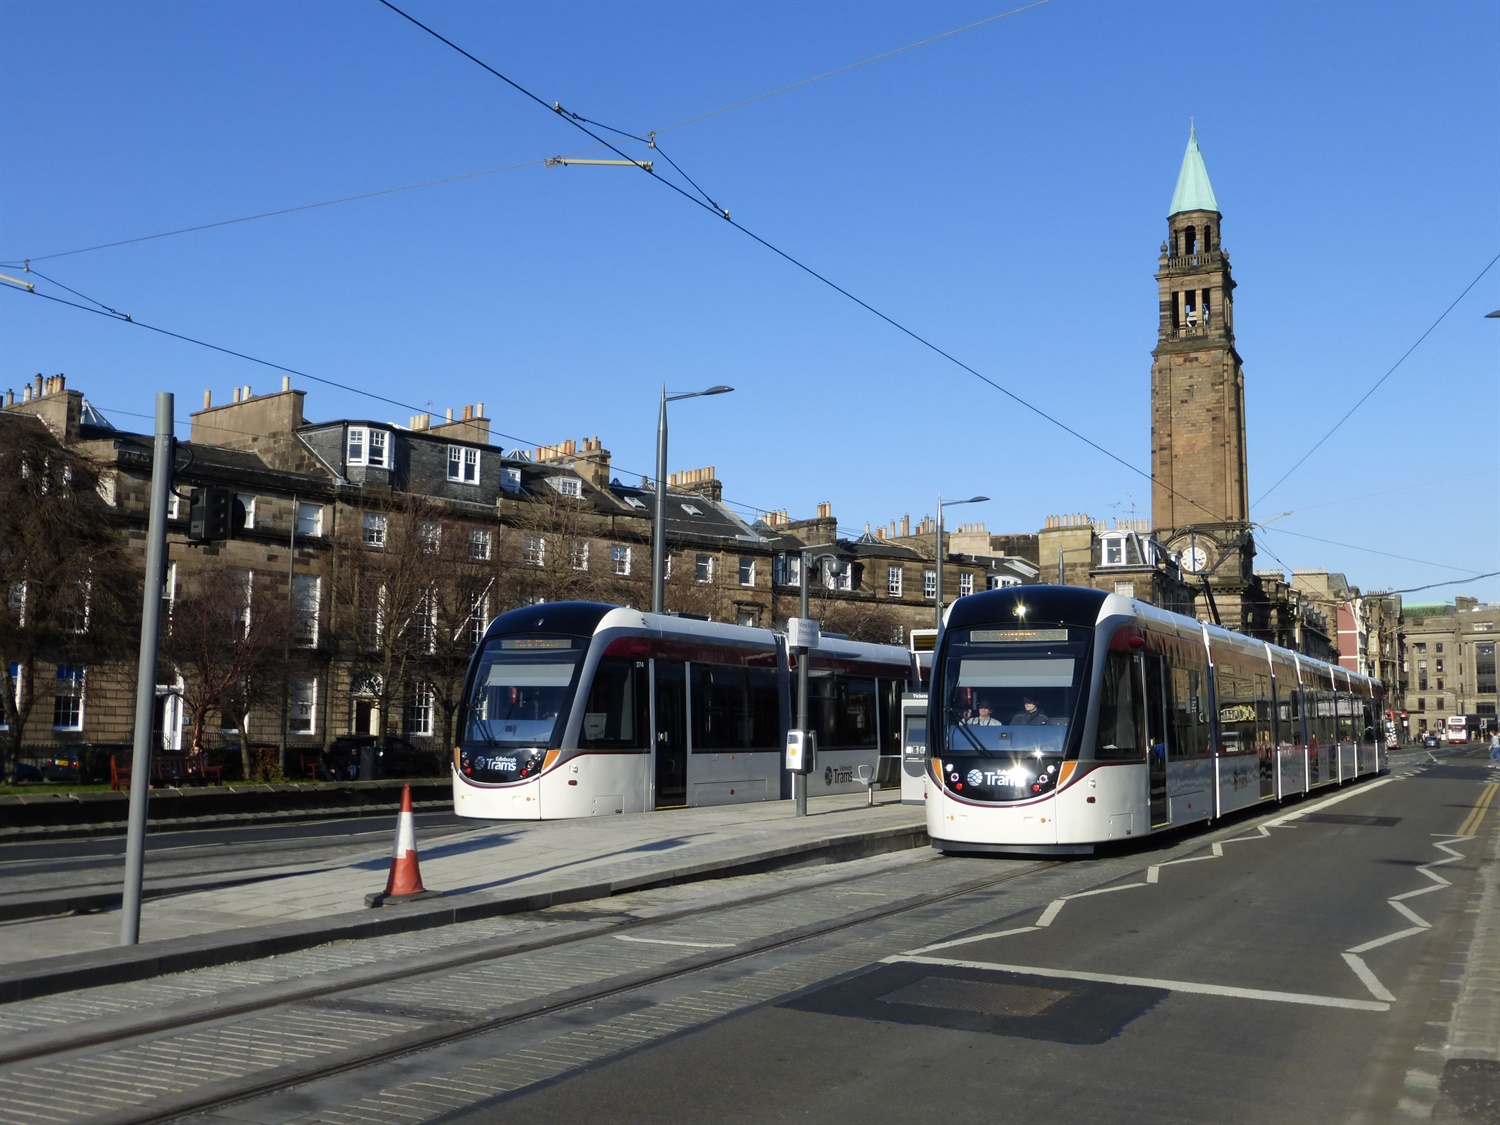 High-level satisfaction for tram passengers